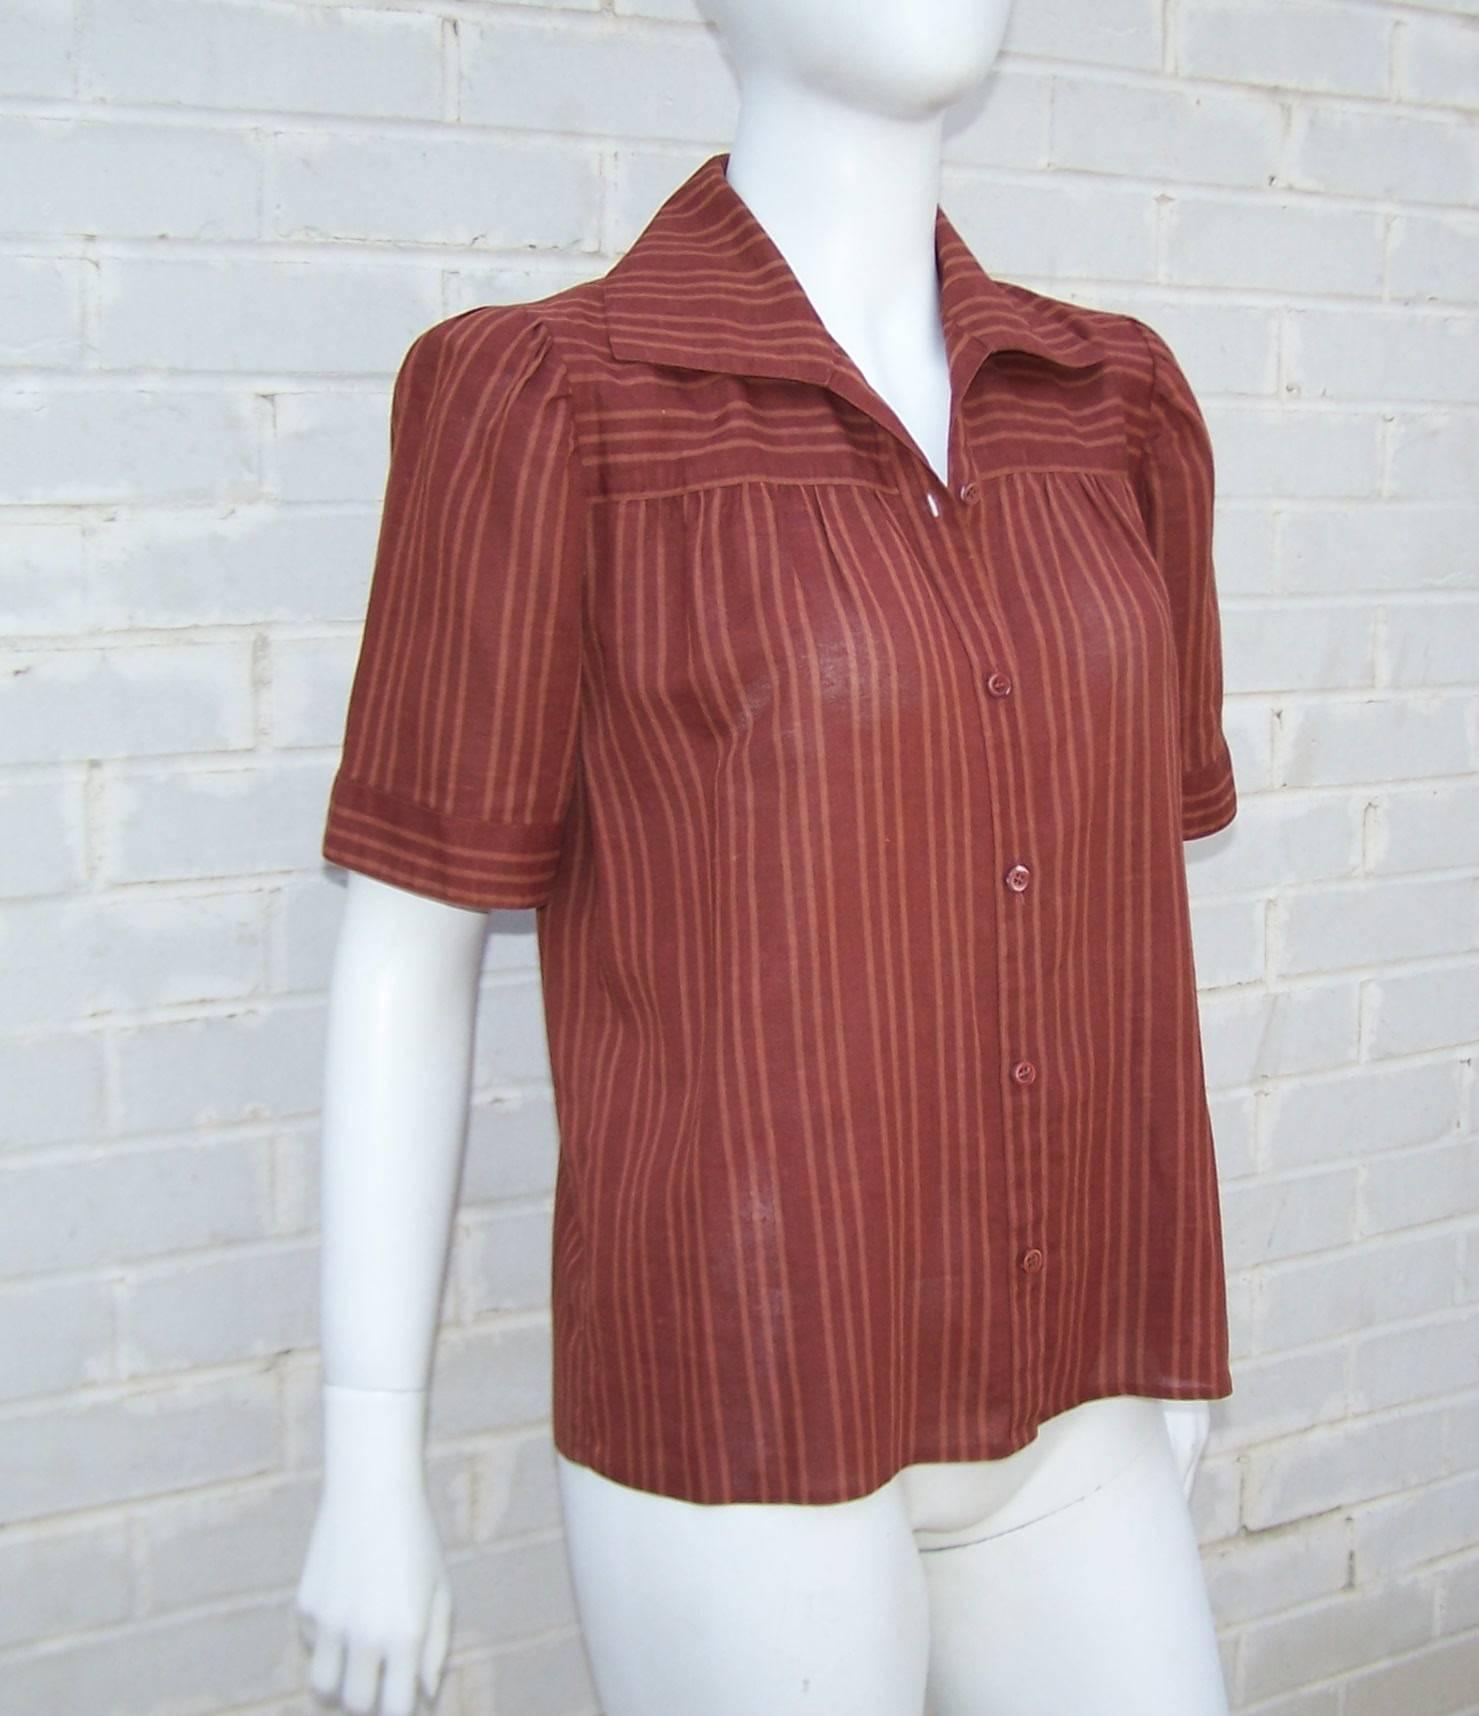 An airy and effortless 1970's linen top by Yves Saint Laurent which is perfect for the warm days of Summer and the mild days of Fall.  The reddish brown striped fabric is expertly cut to provide horizontal stripes across the shoulder with vertical